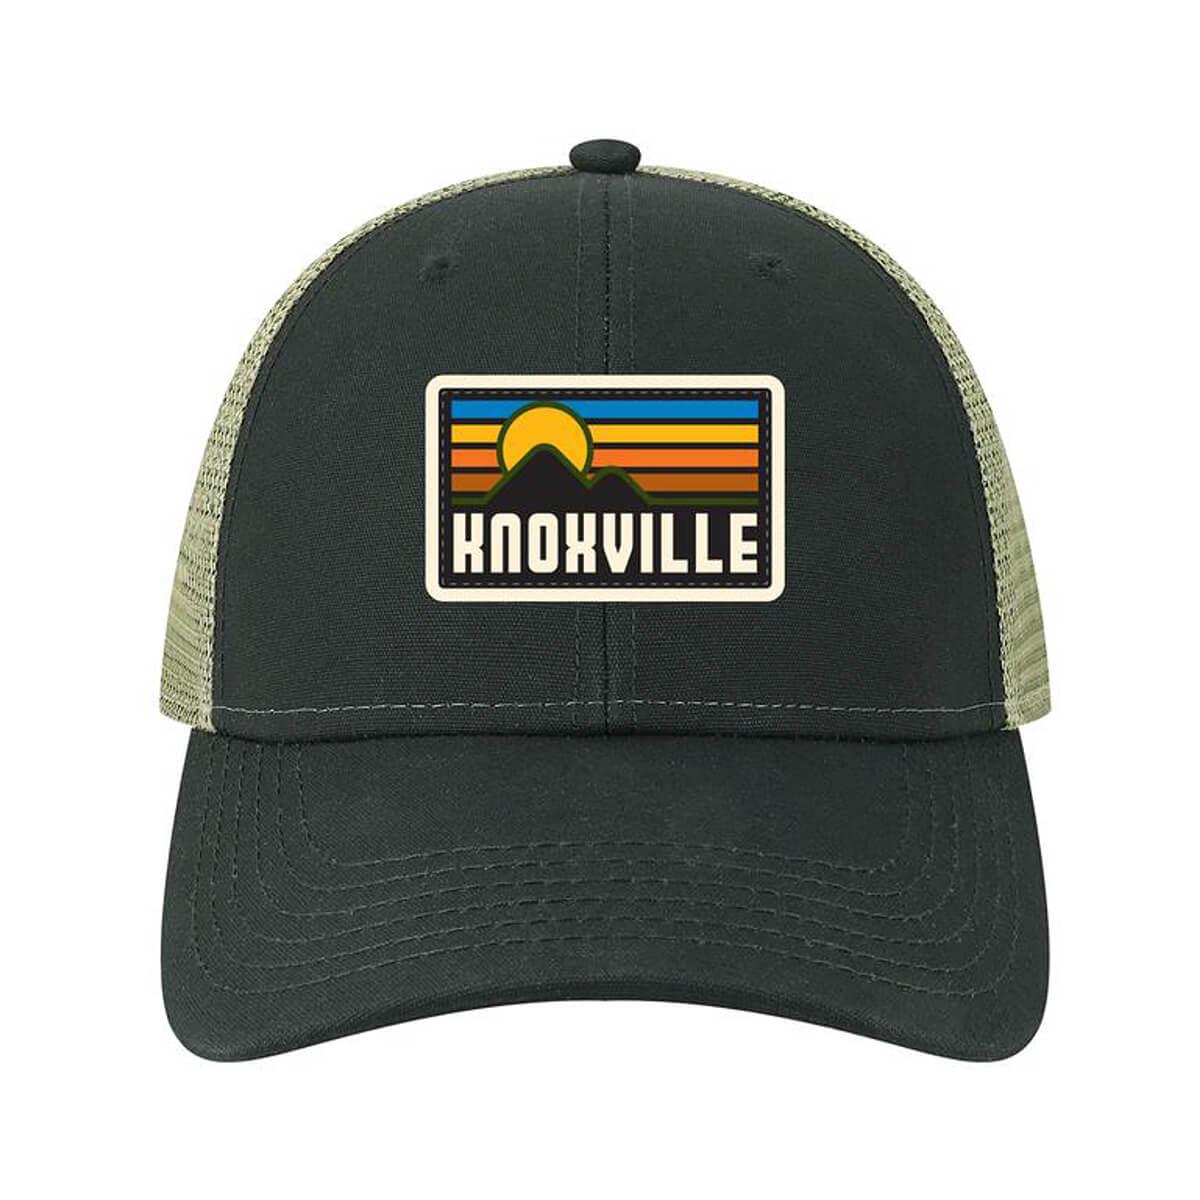 Mast General Store  Knoxville Lo Pro Snapback Trucker Hat